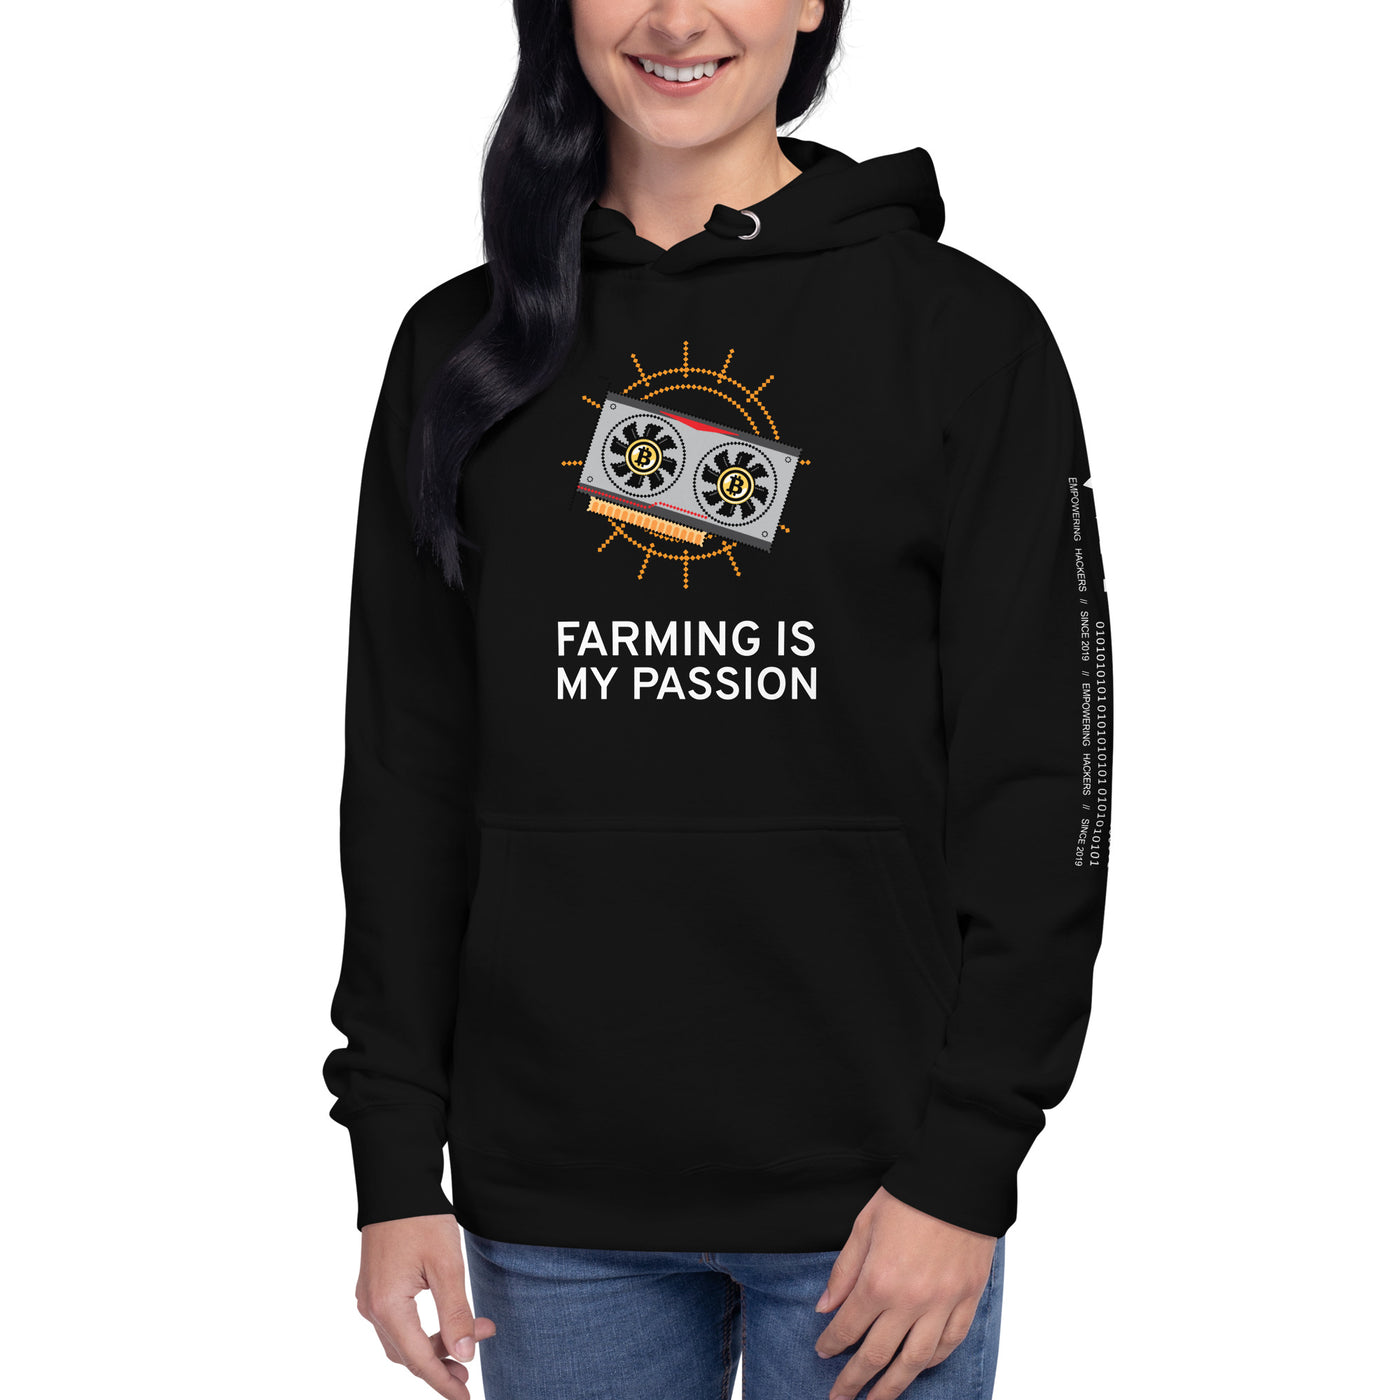 Farming is my passion - Unisex Hoodie